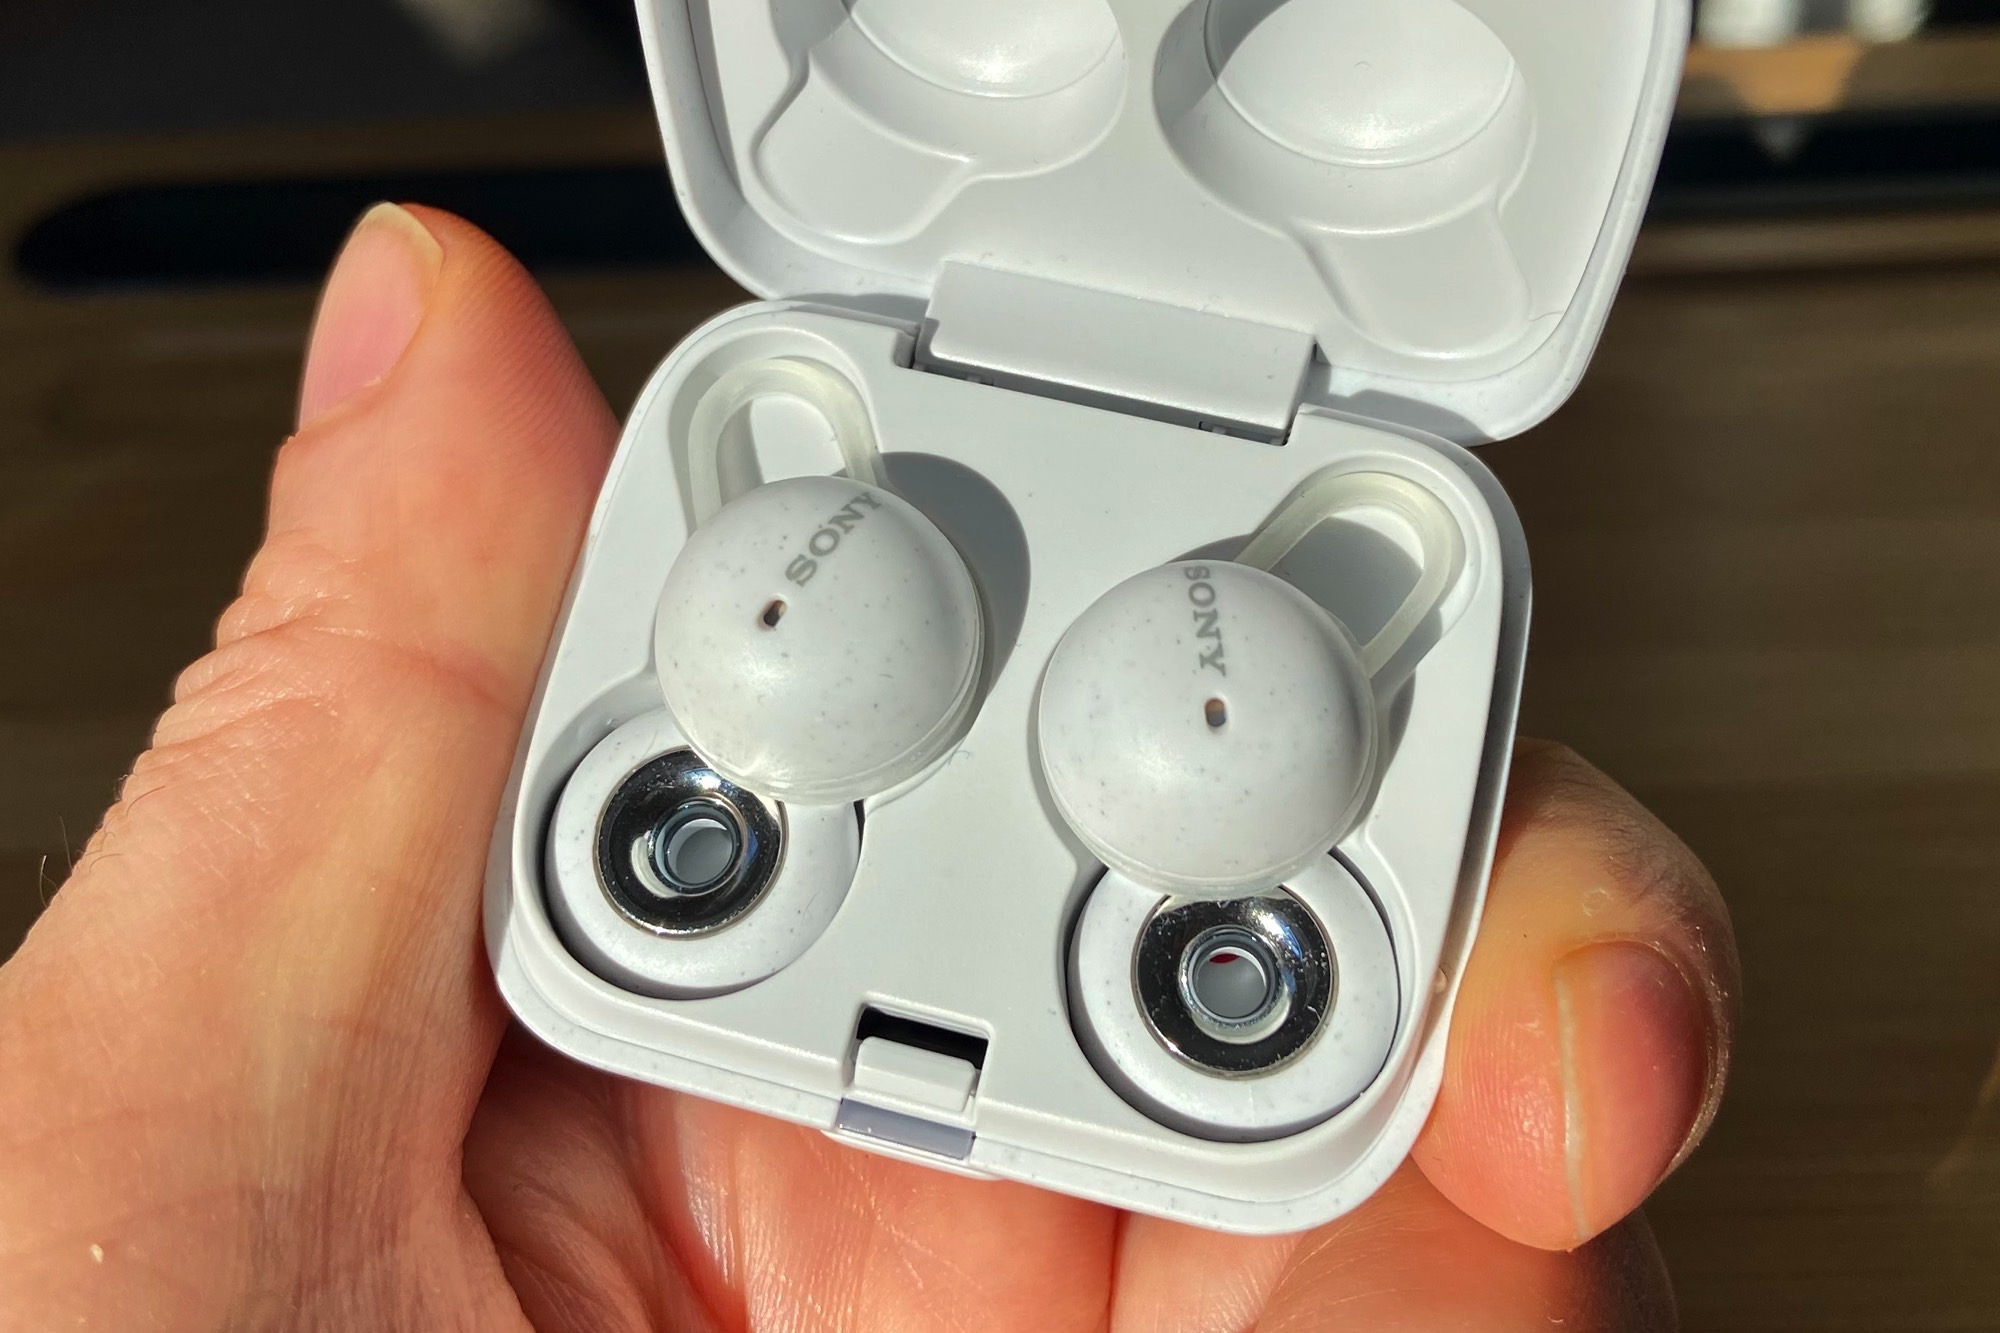 Sony LinkBuds S review: Tiny earbuds with big sound